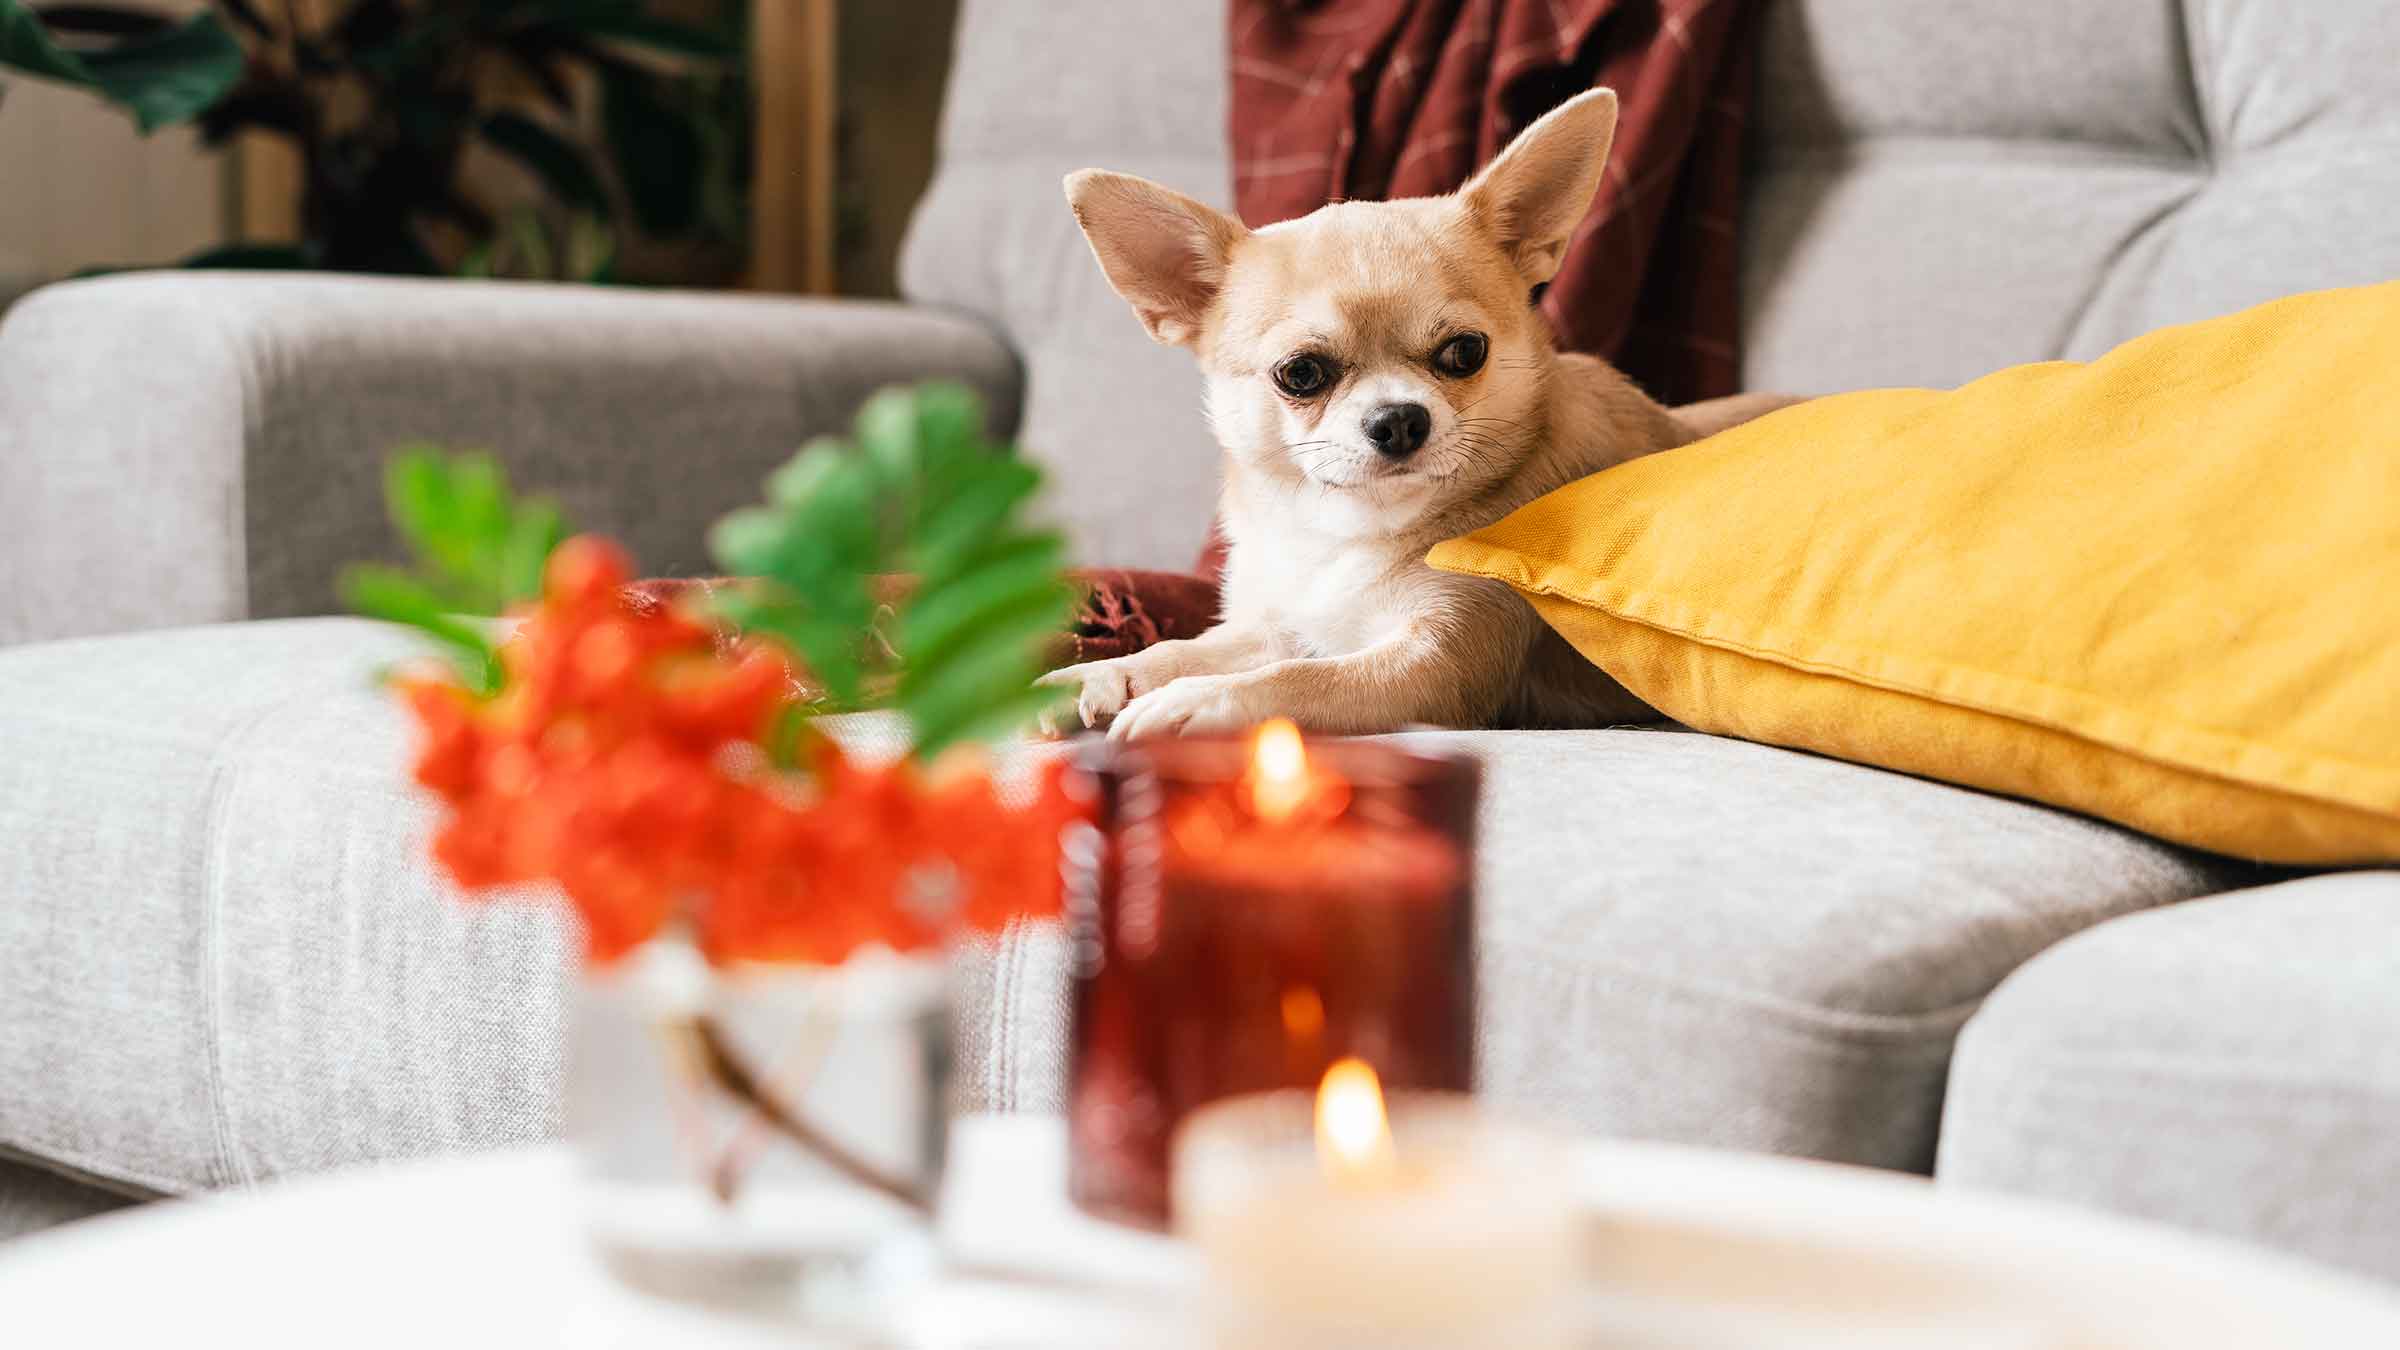 https://images.ctfassets.net/4f3rgqwzdznj/14wbIJBfDvU1XX905Rzv8I/f2fc96556991c719162e7a19ed97cd75/dog_couch_candle_1347233764.jpg